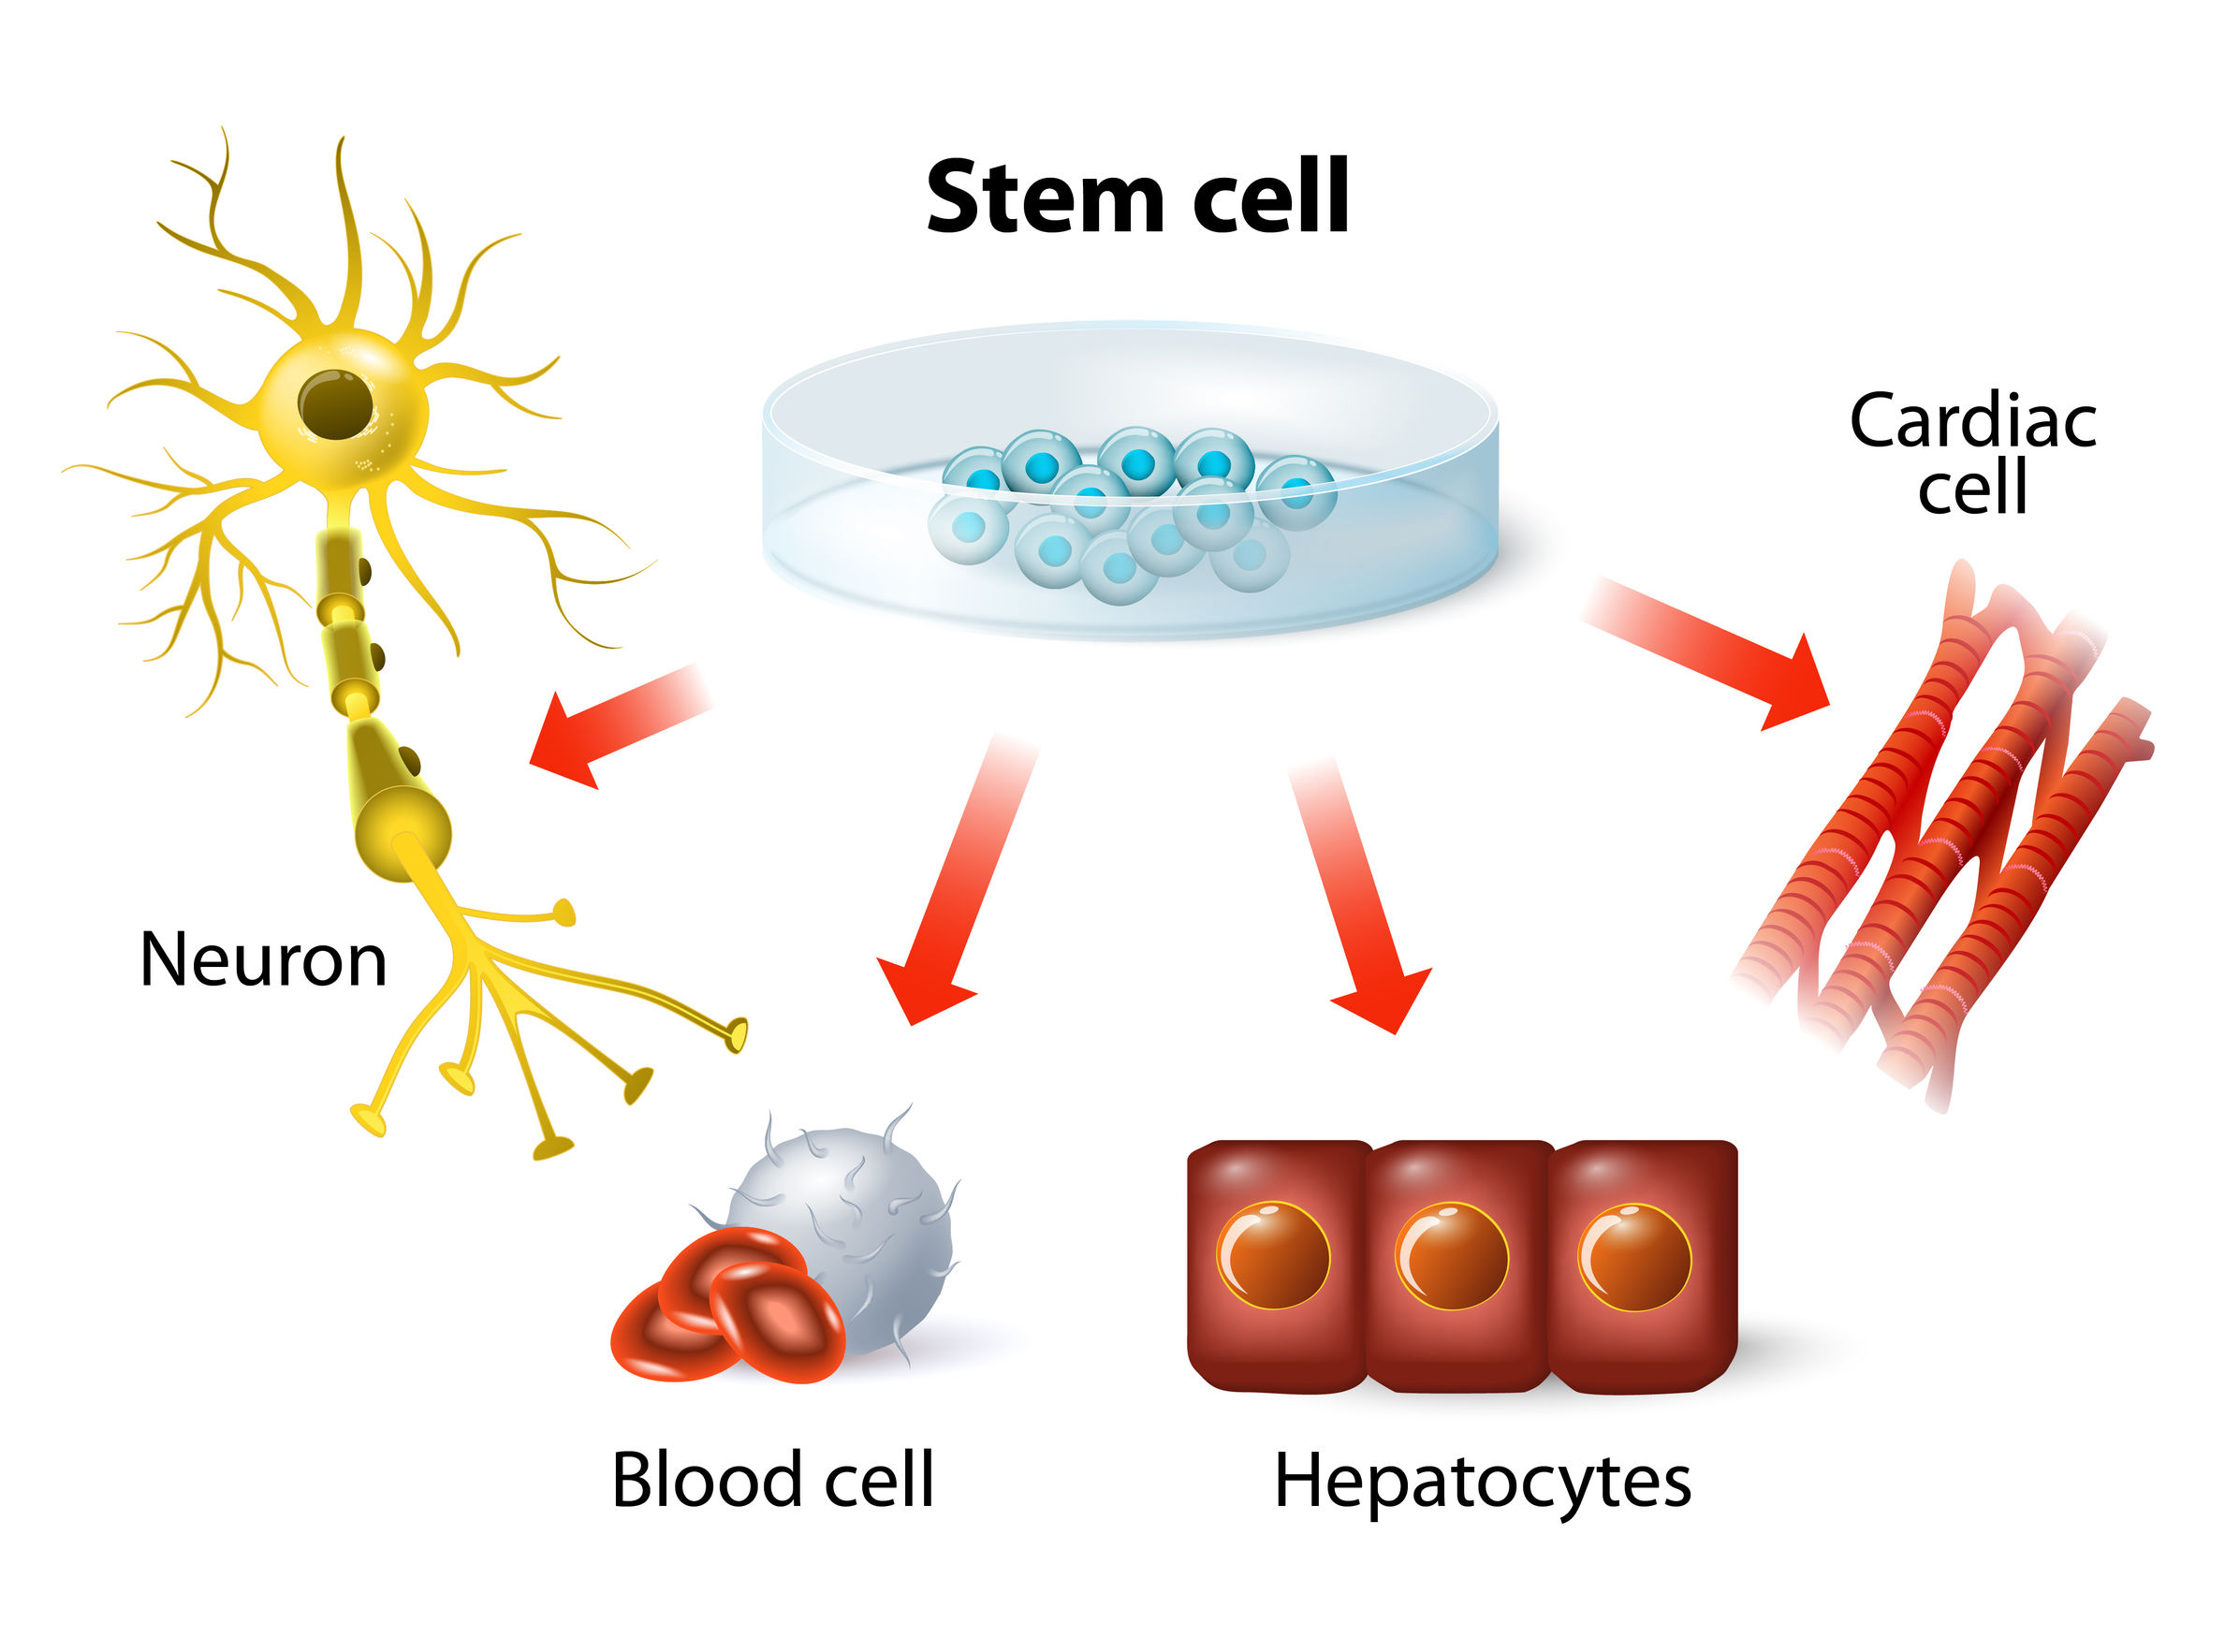 Stem cells used as source of cardiomyocytes for predictive toxicology in drug discovery